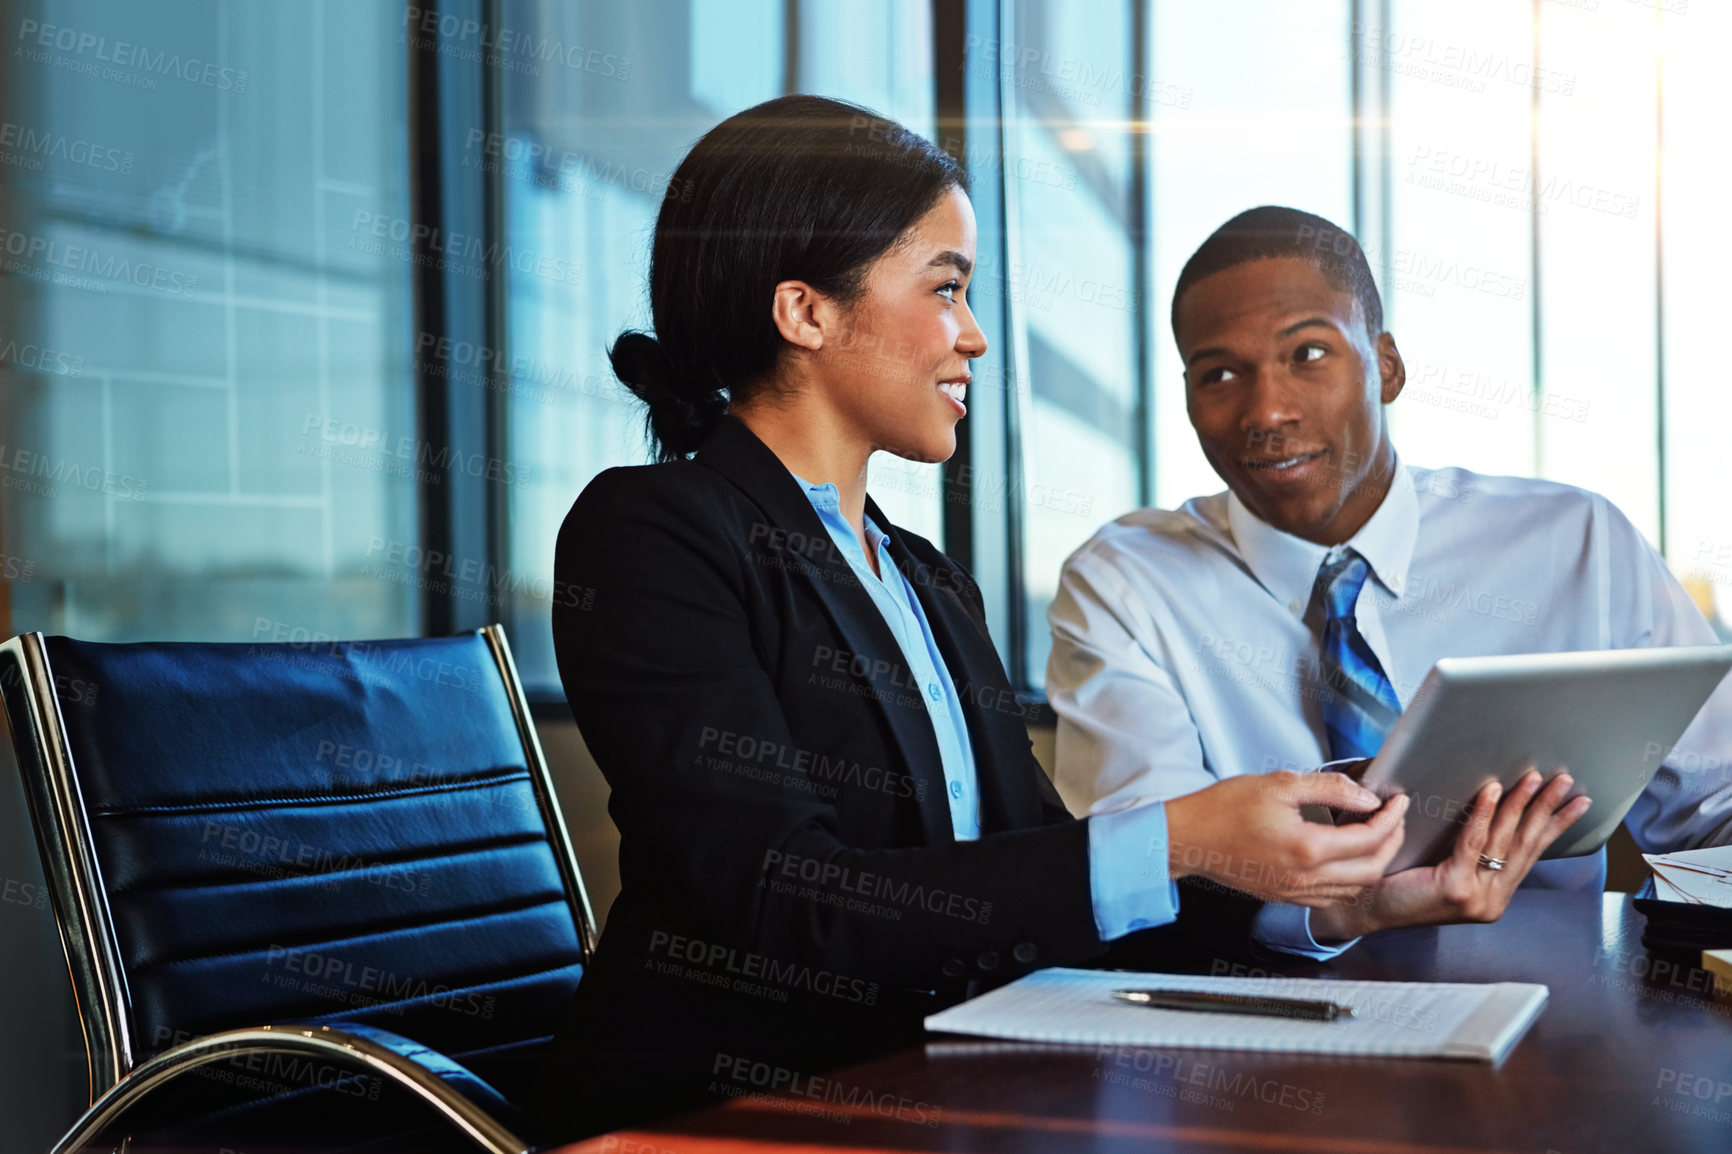 Buy stock photo Cropped shot of two young businesspeople meeting in the boardroom